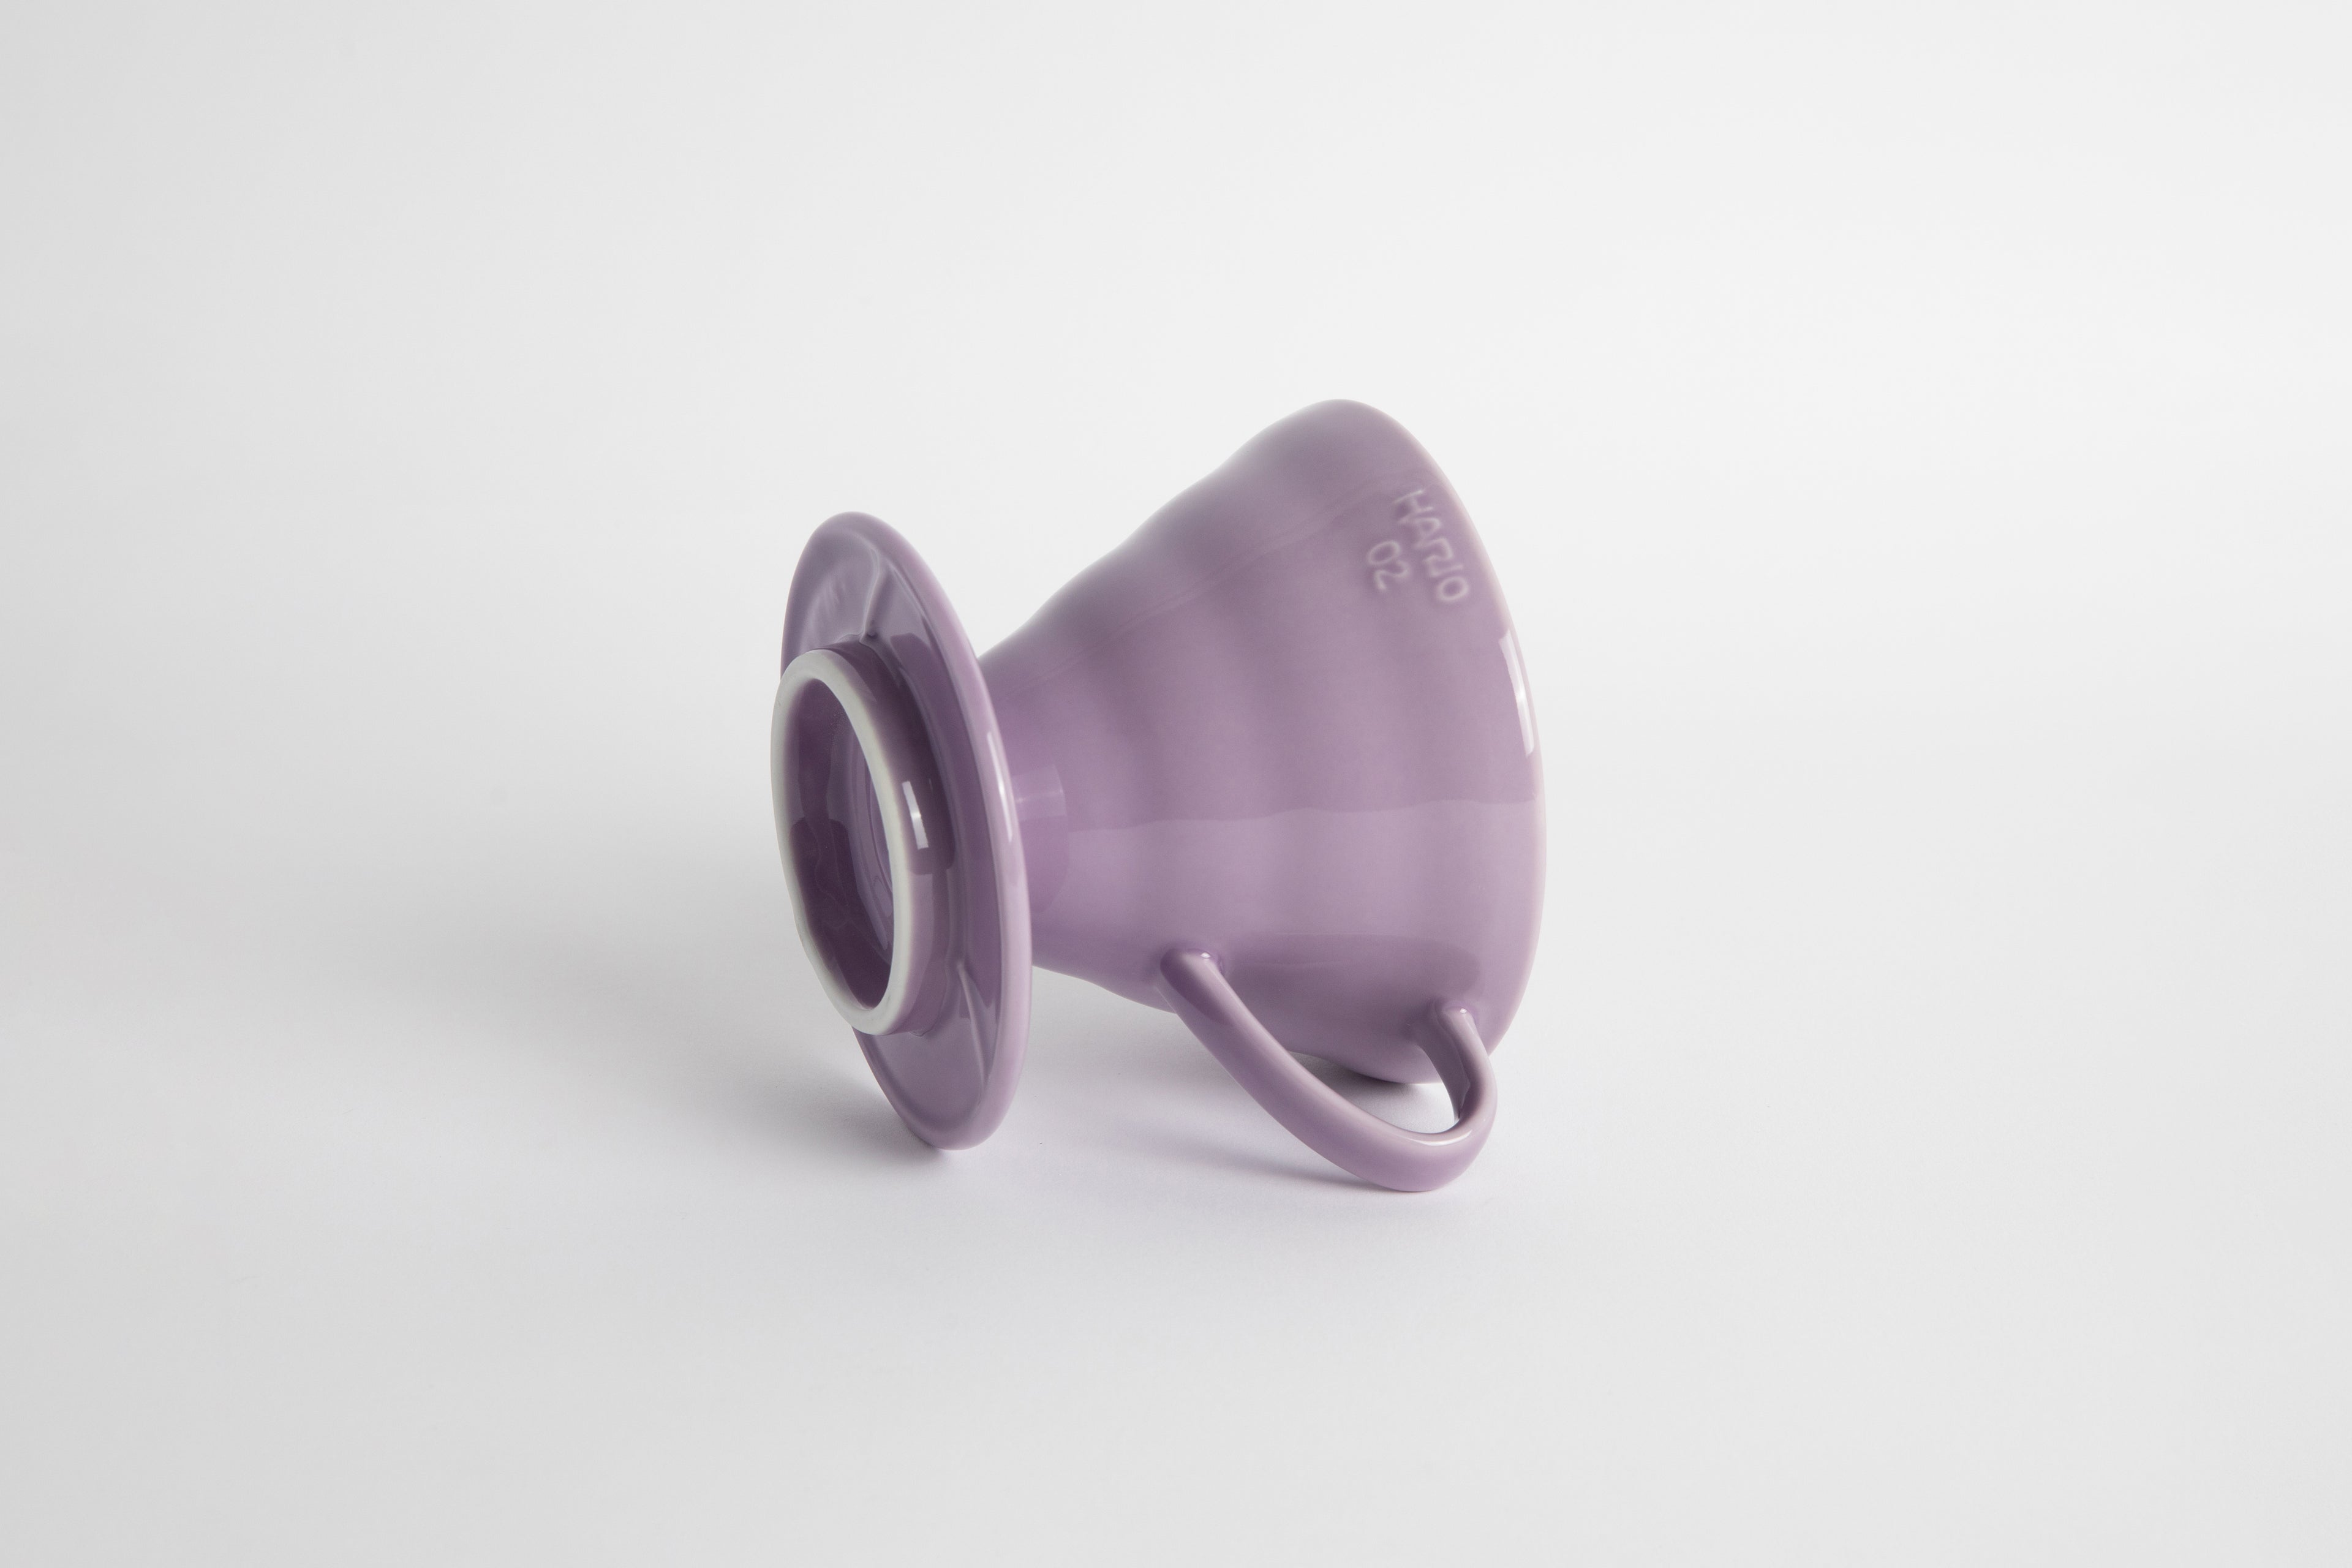 Purple Heather 60 degree cone shaped ceramic coffee dripper with handle and round base. Set on white background